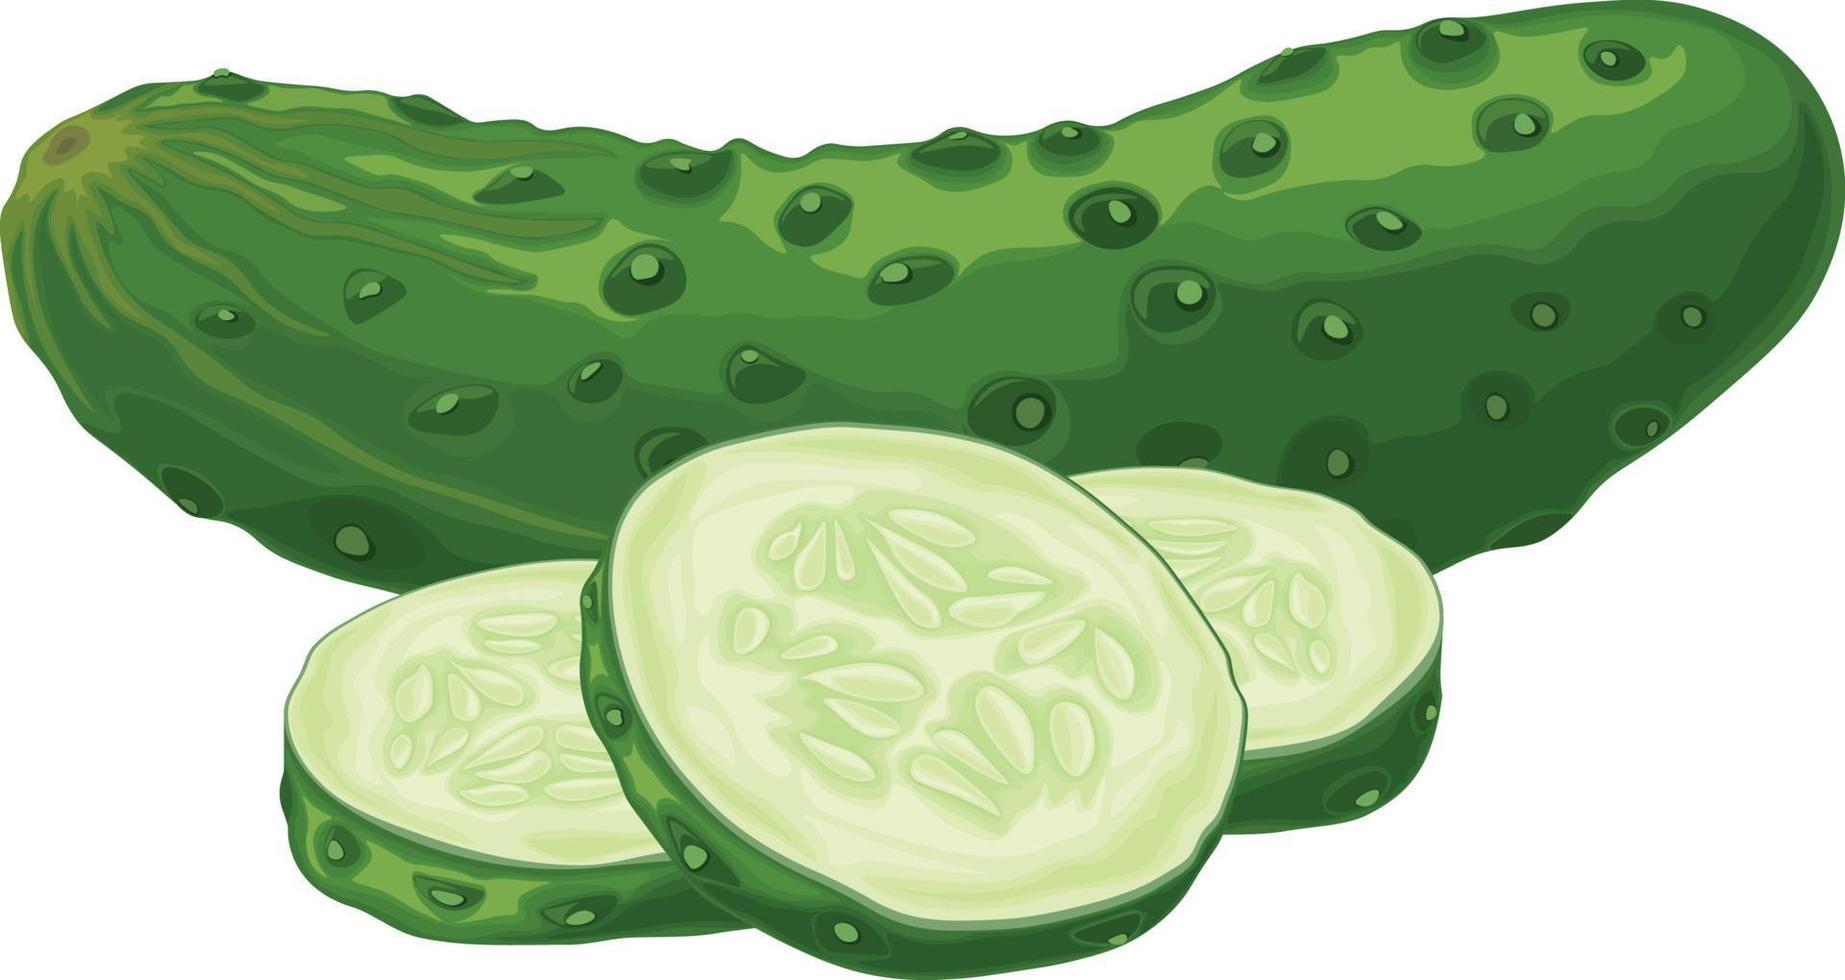 Green cucumber. Image of a ripe sliced green cucumber. Green vegetarian product. Vector illustration isolated on a white background